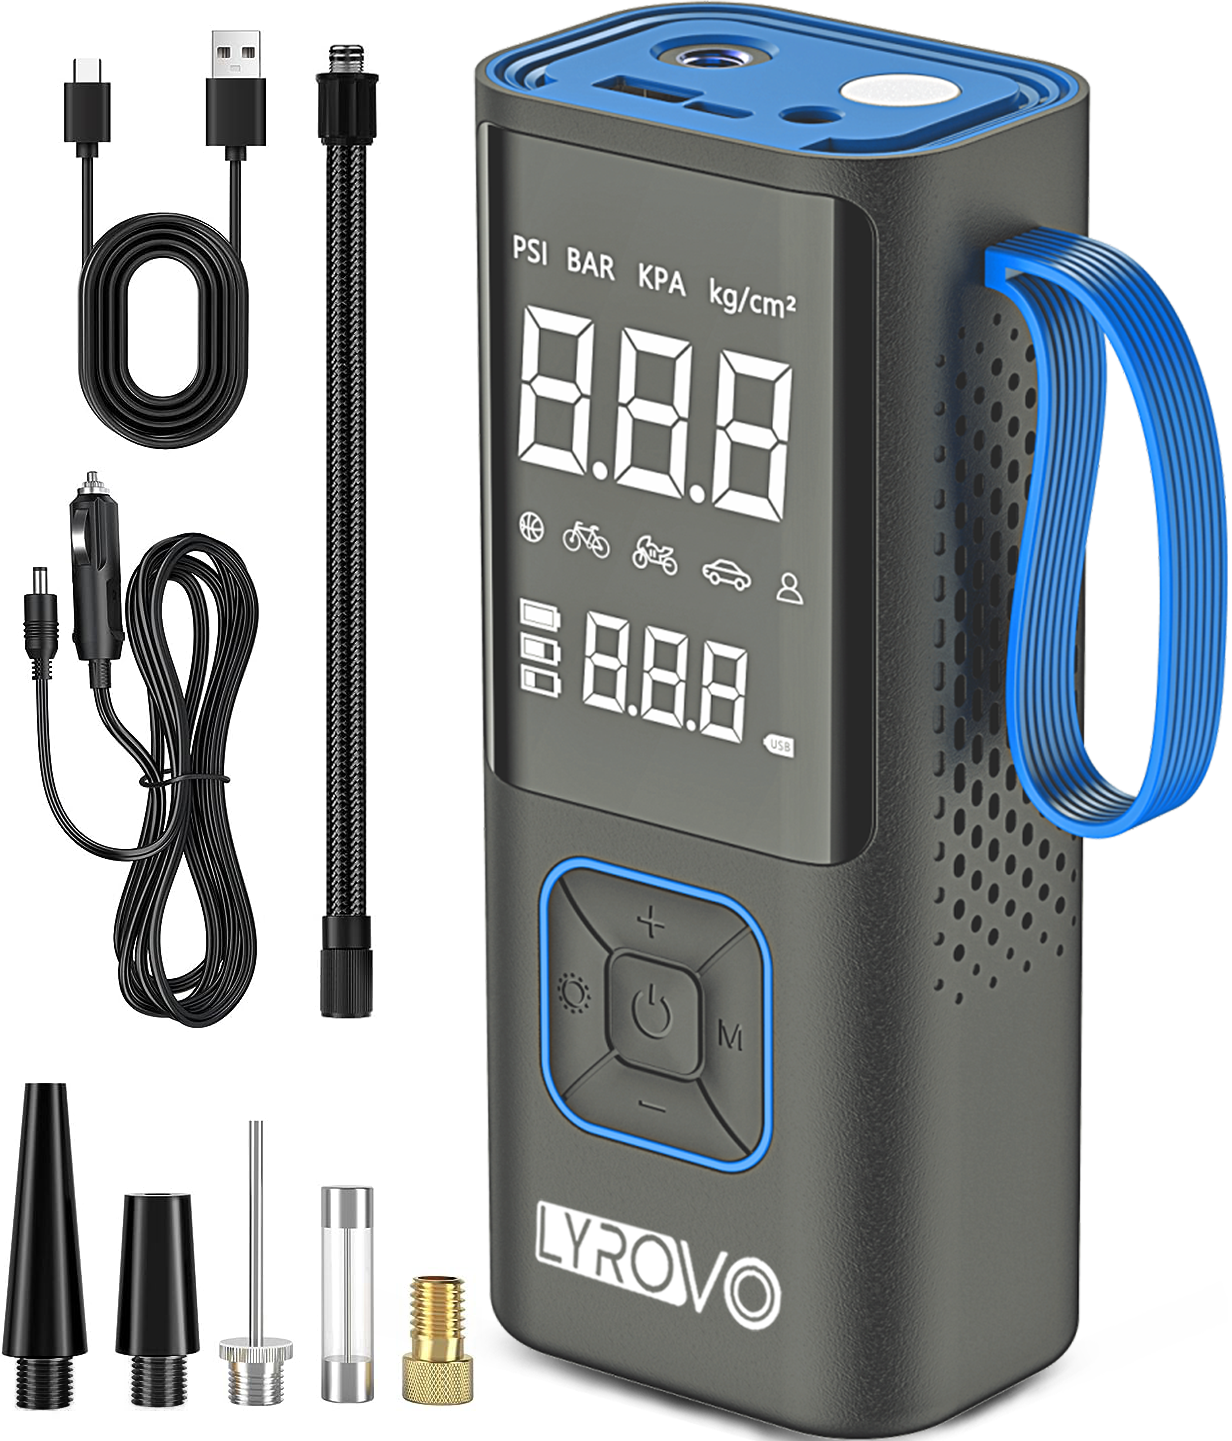 Lyrovo Wired/Wireless 2-in-1 Tyre Inflator - 150 PSI 2X Faster Portabl